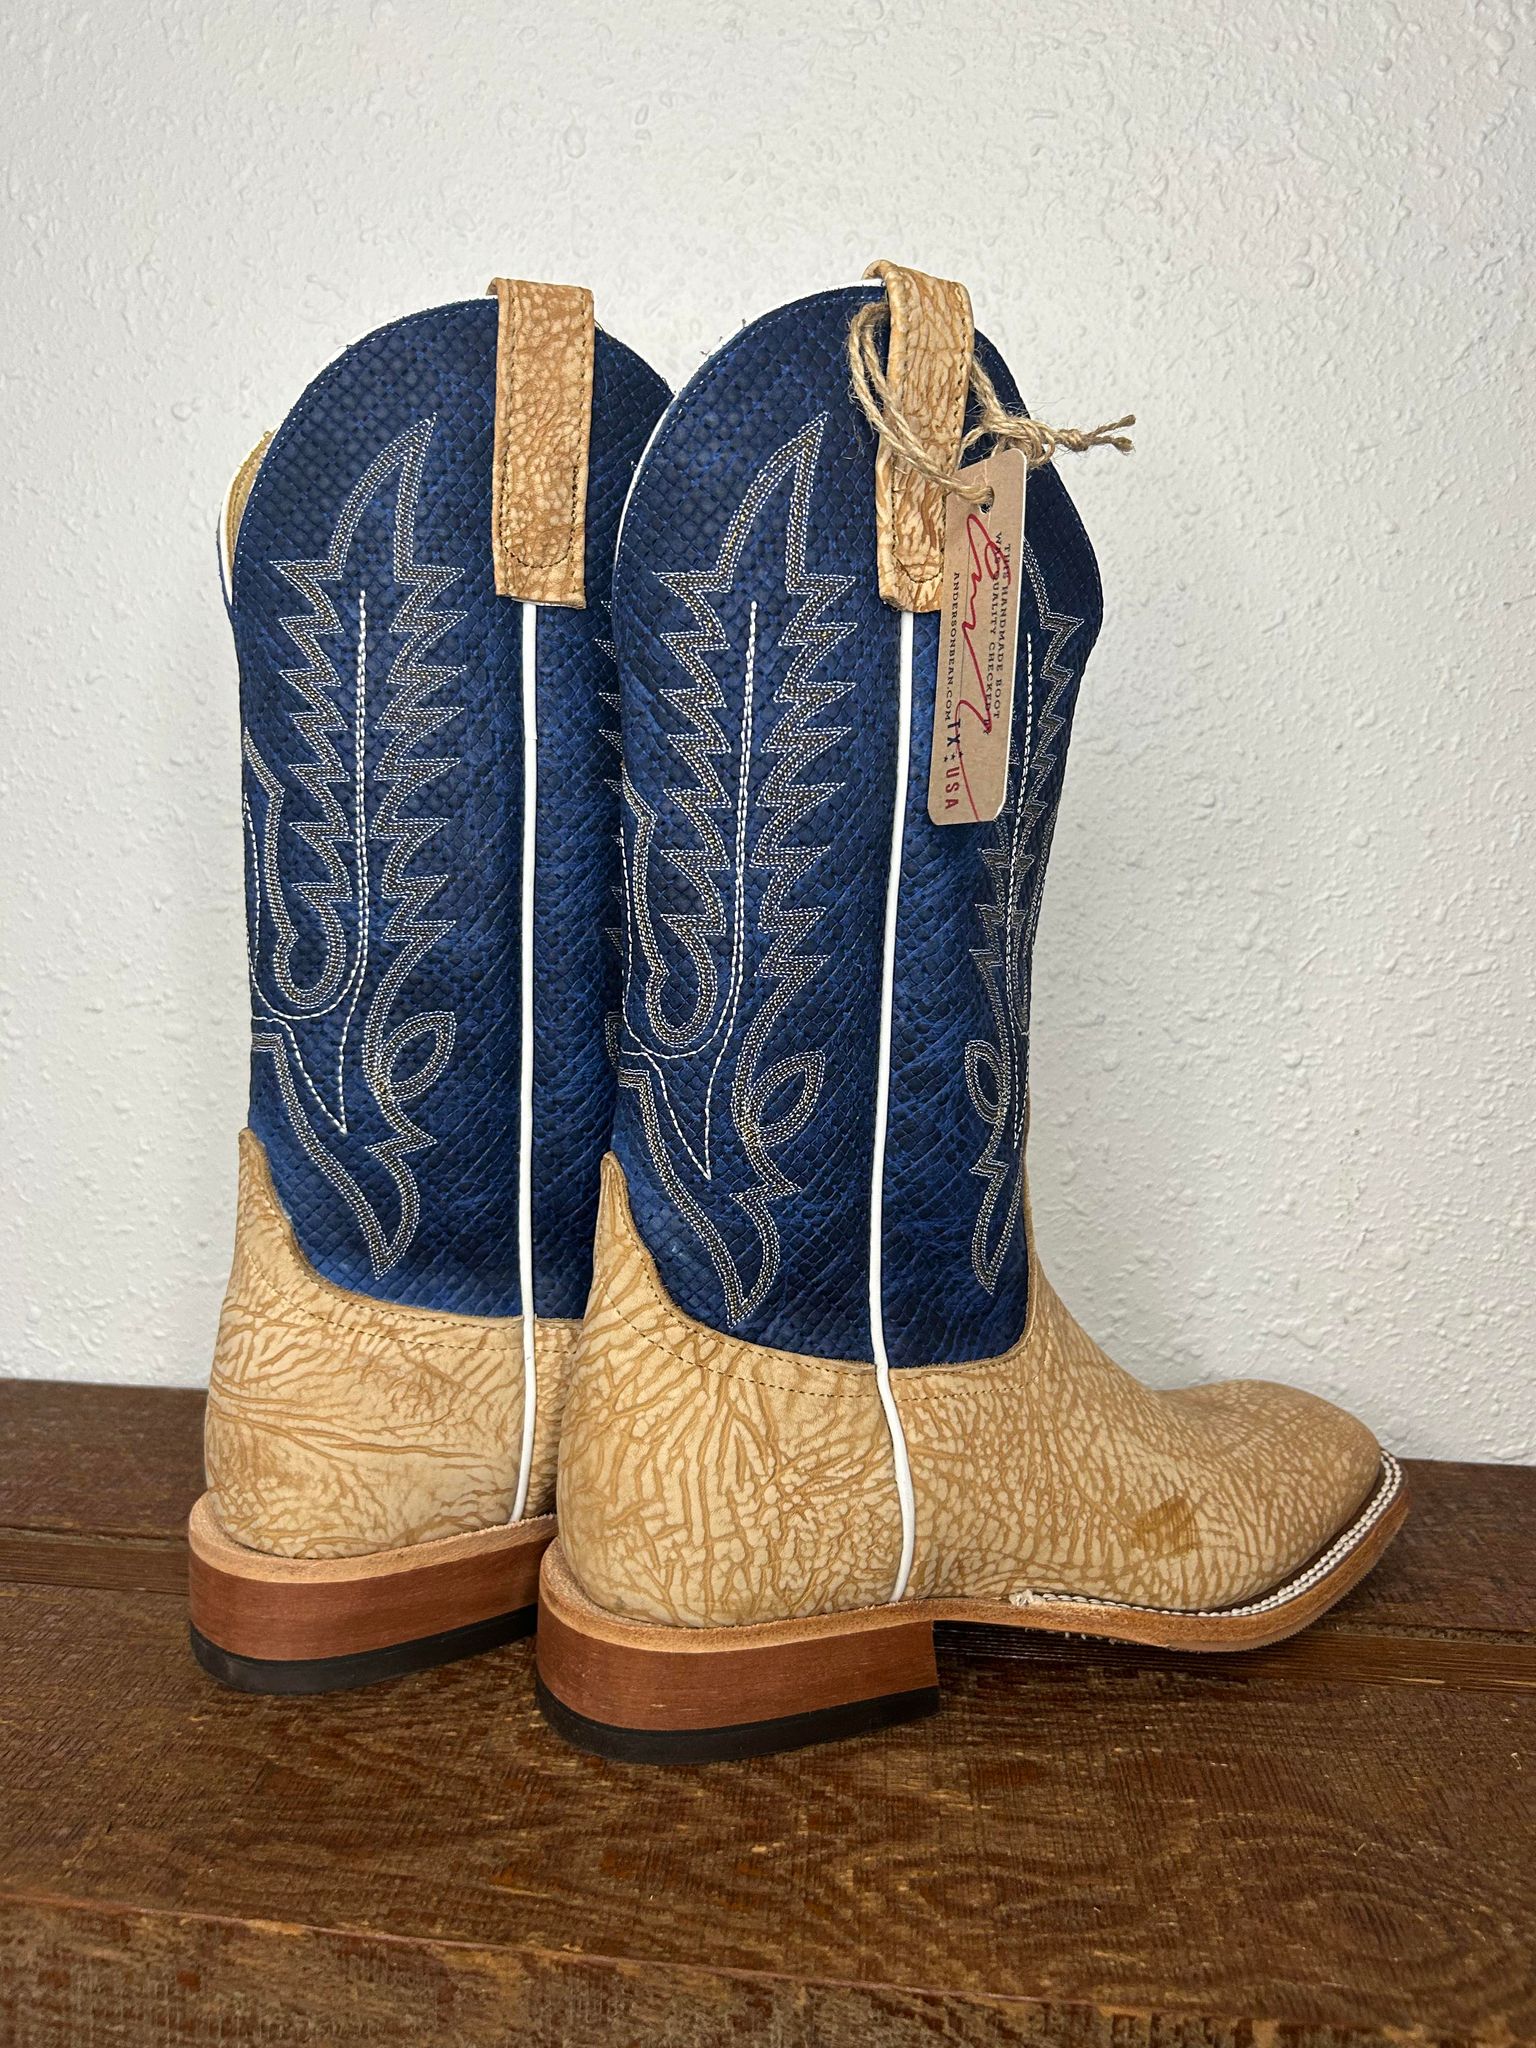 Men's Anderson Bean Tan Washed Shoulder & Blue Chex Boots-Men's Boots-Anderson Bean-Lucky J Boots & More, Women's, Men's, & Kids Western Store Located in Carthage, MO